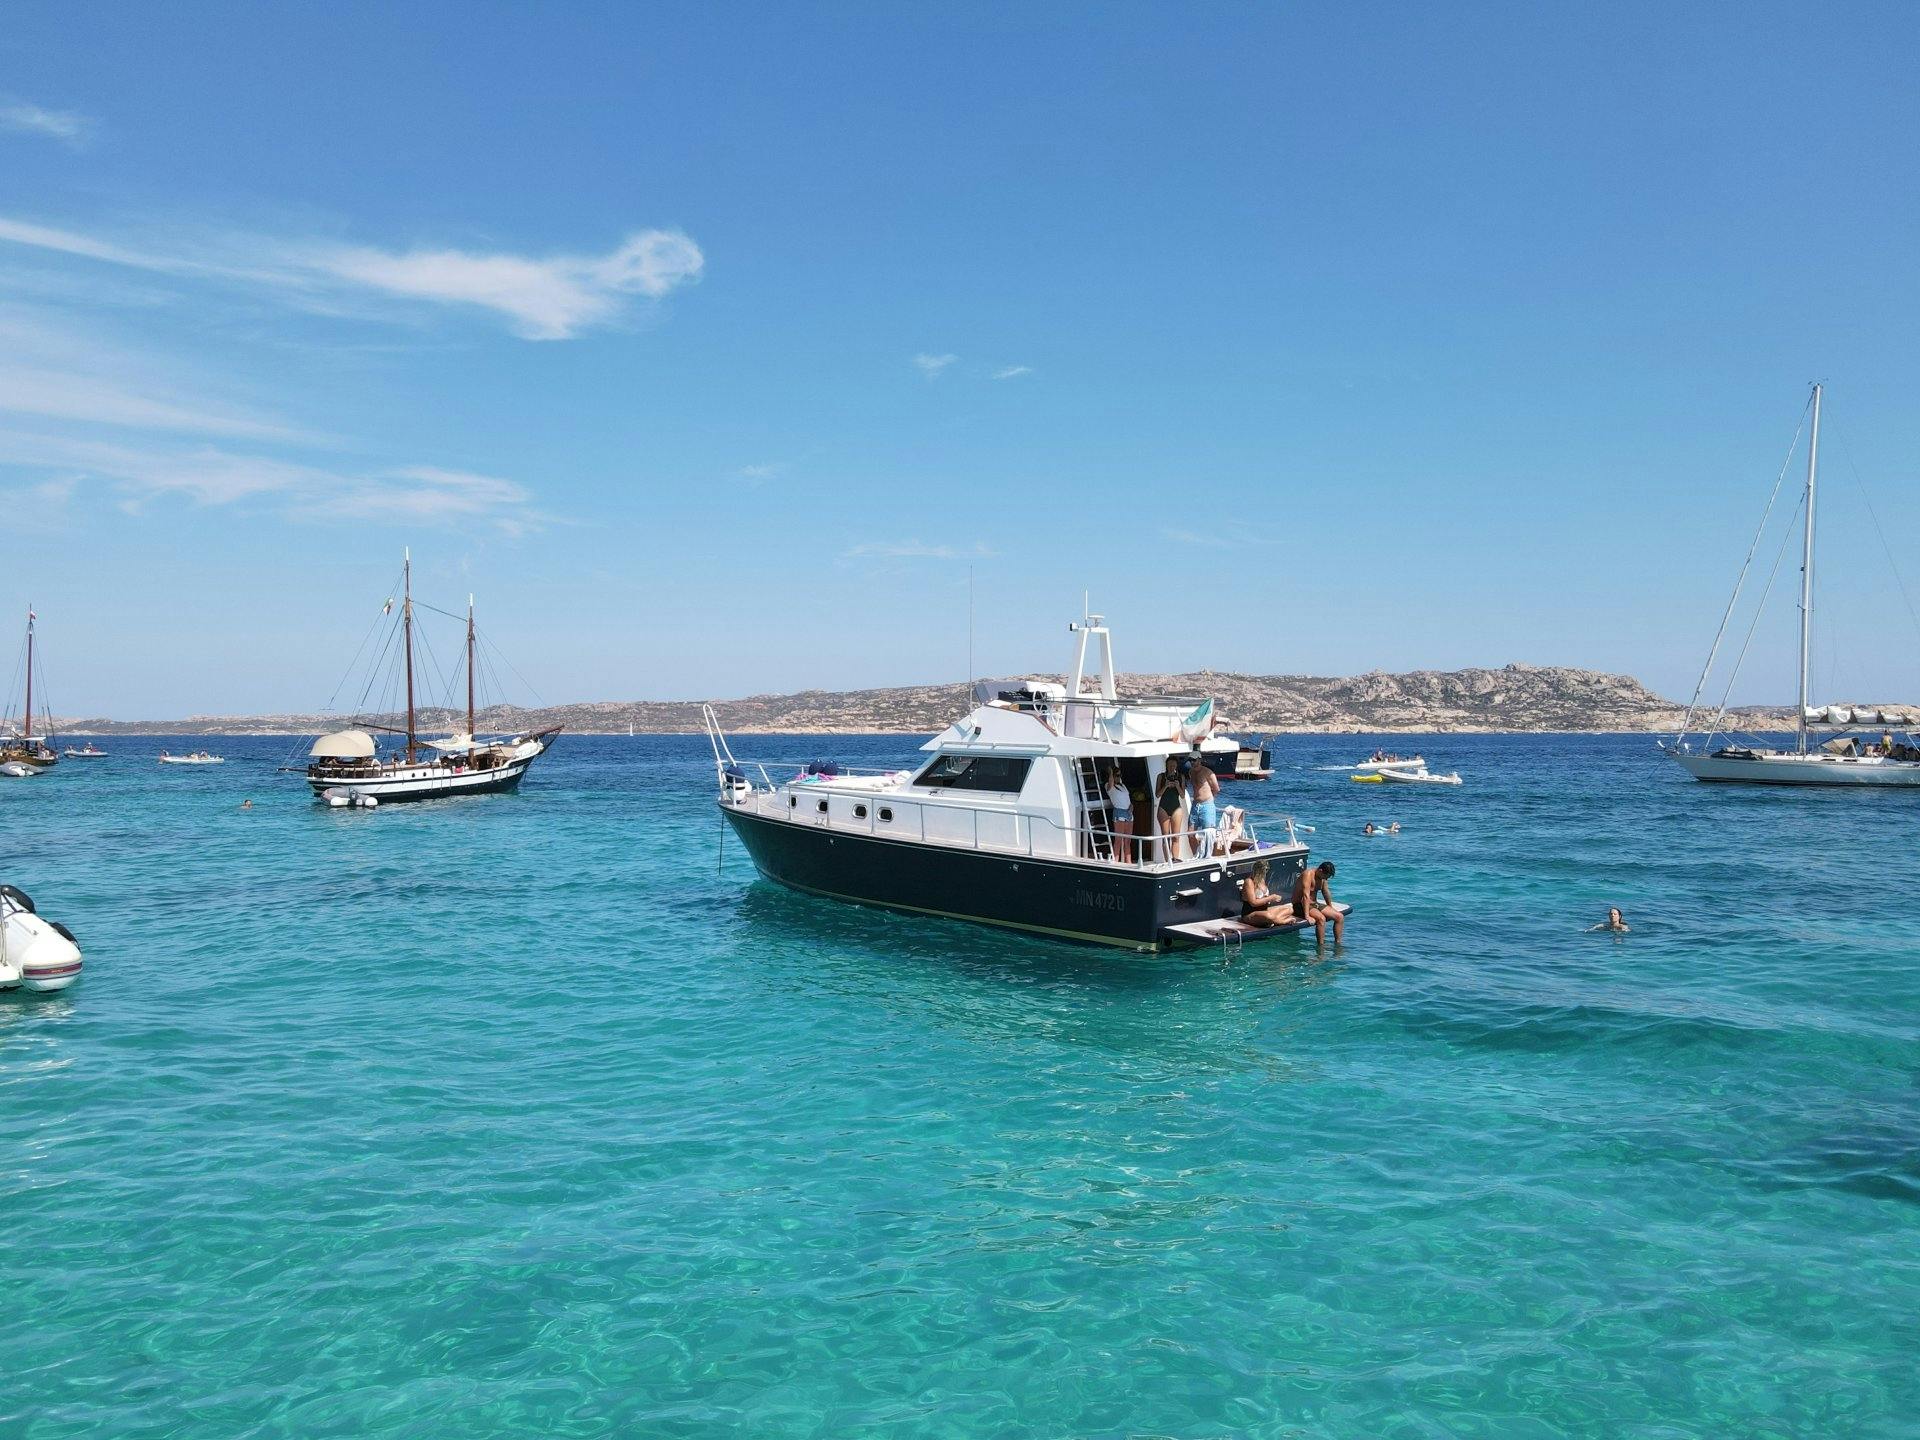 La Maddalena Archipel motor boat tour with swimming stop